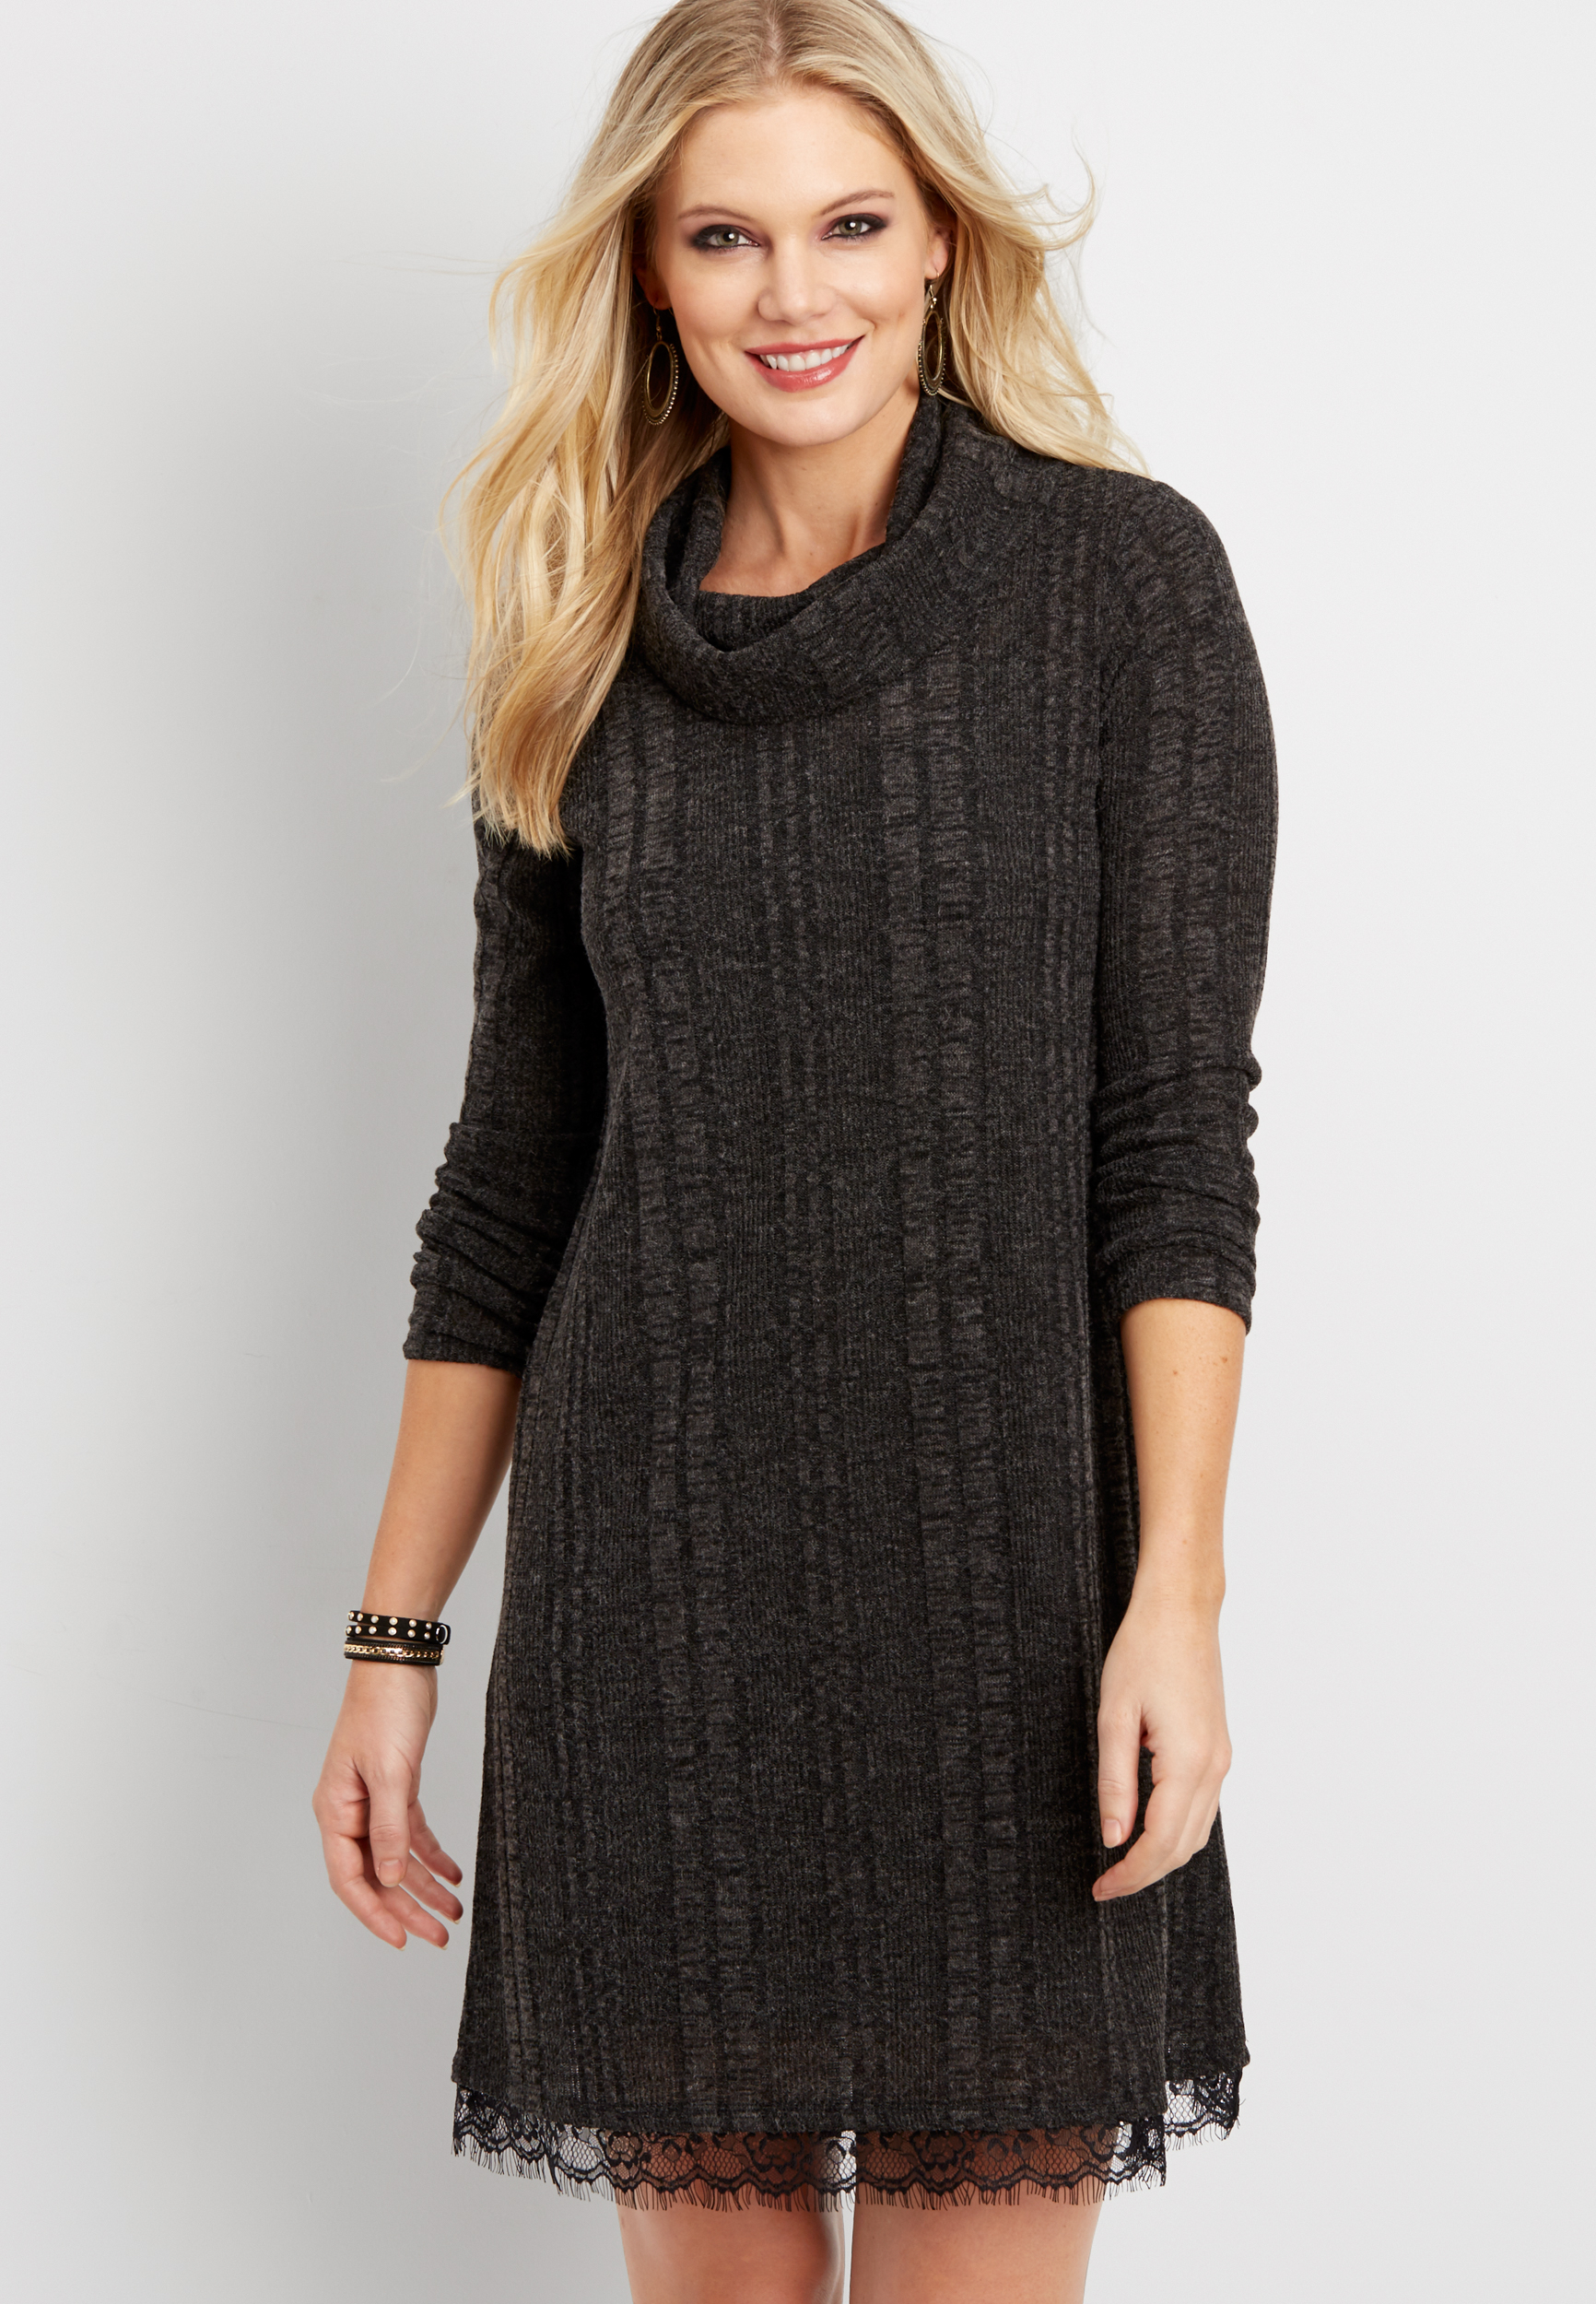 sweater dress with cowl neck and lace bottom hem | maurices